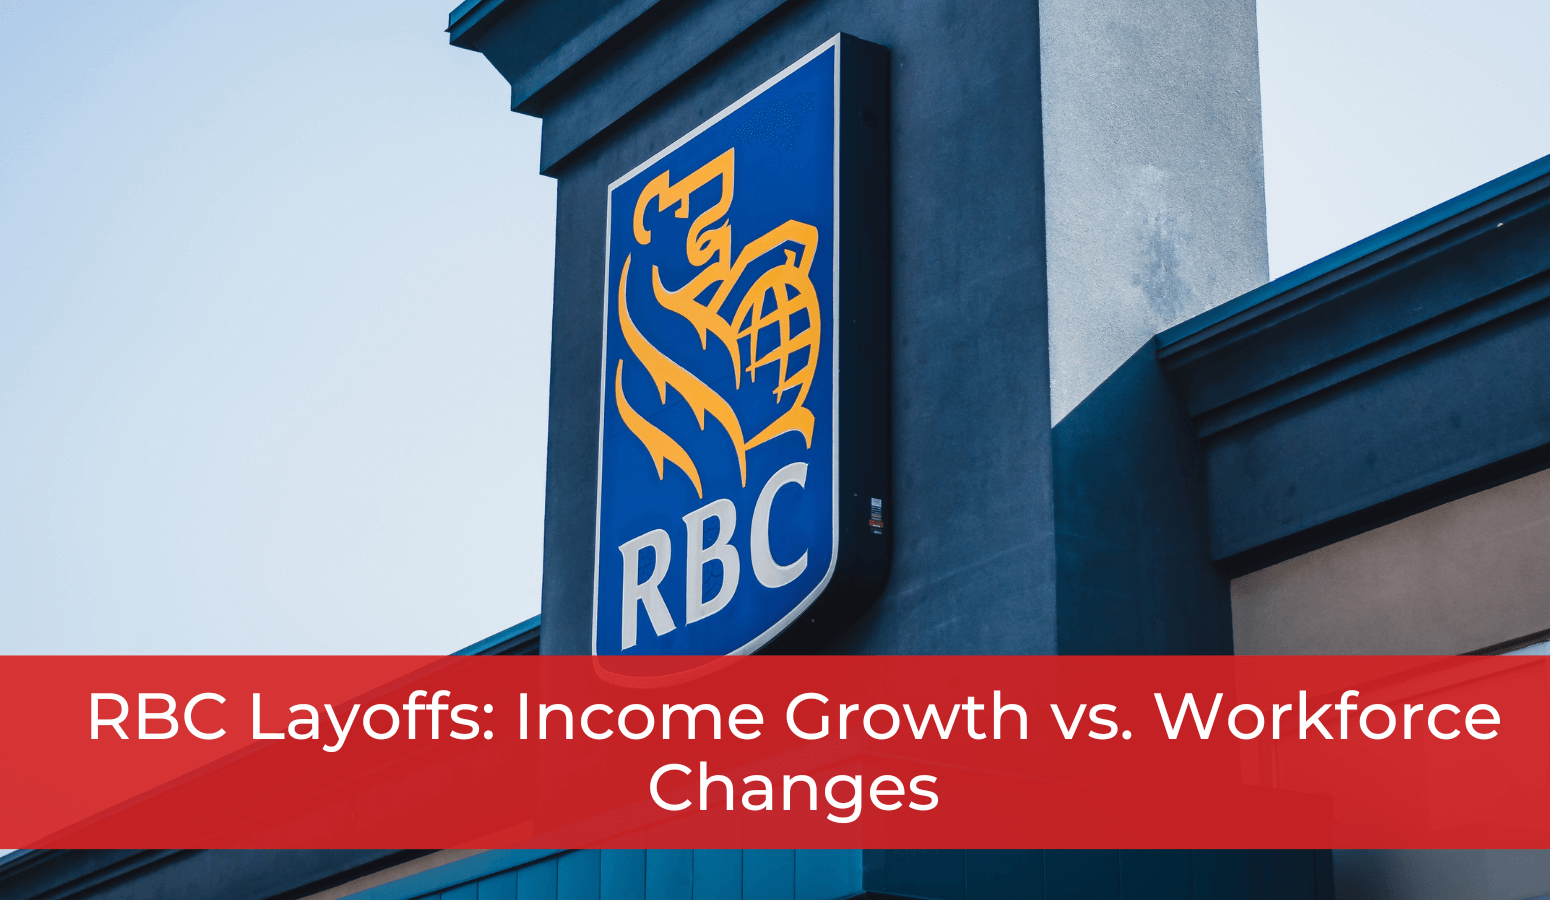 Featured image for “RBC Layoffs: Income Growth vs. Workforce Changes”